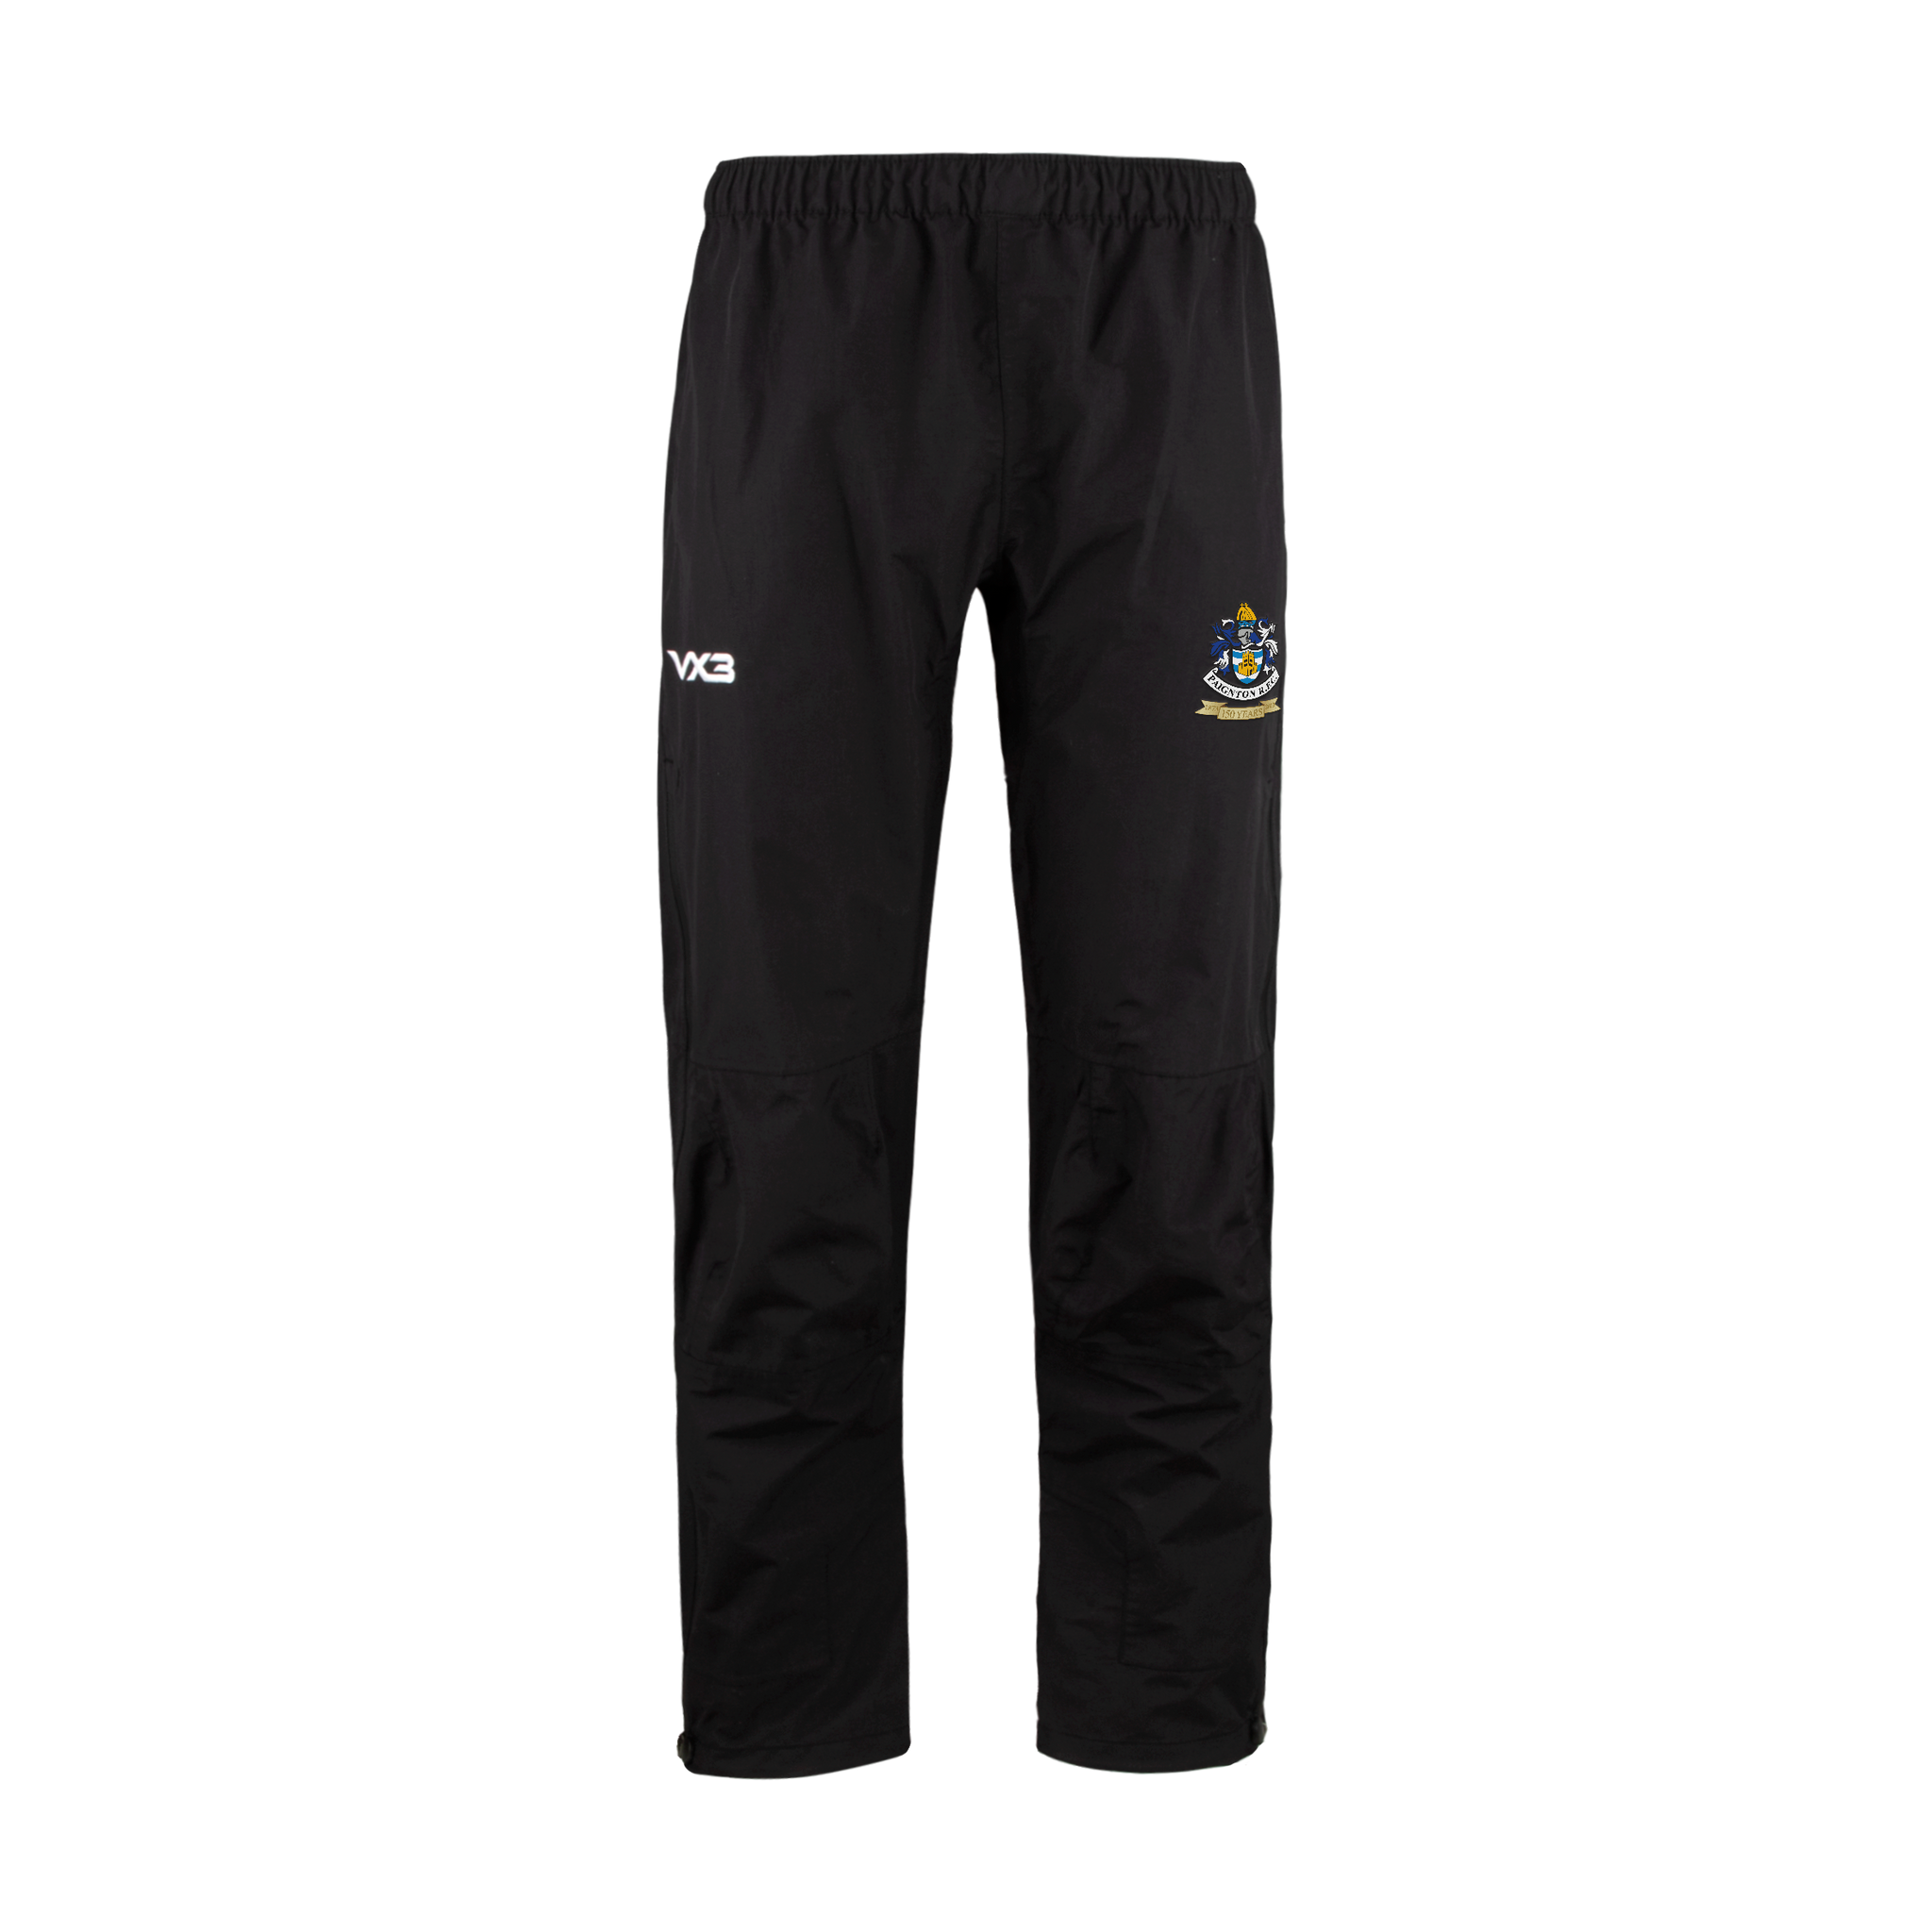 Paignton RFC Protego Waterproof Trousers